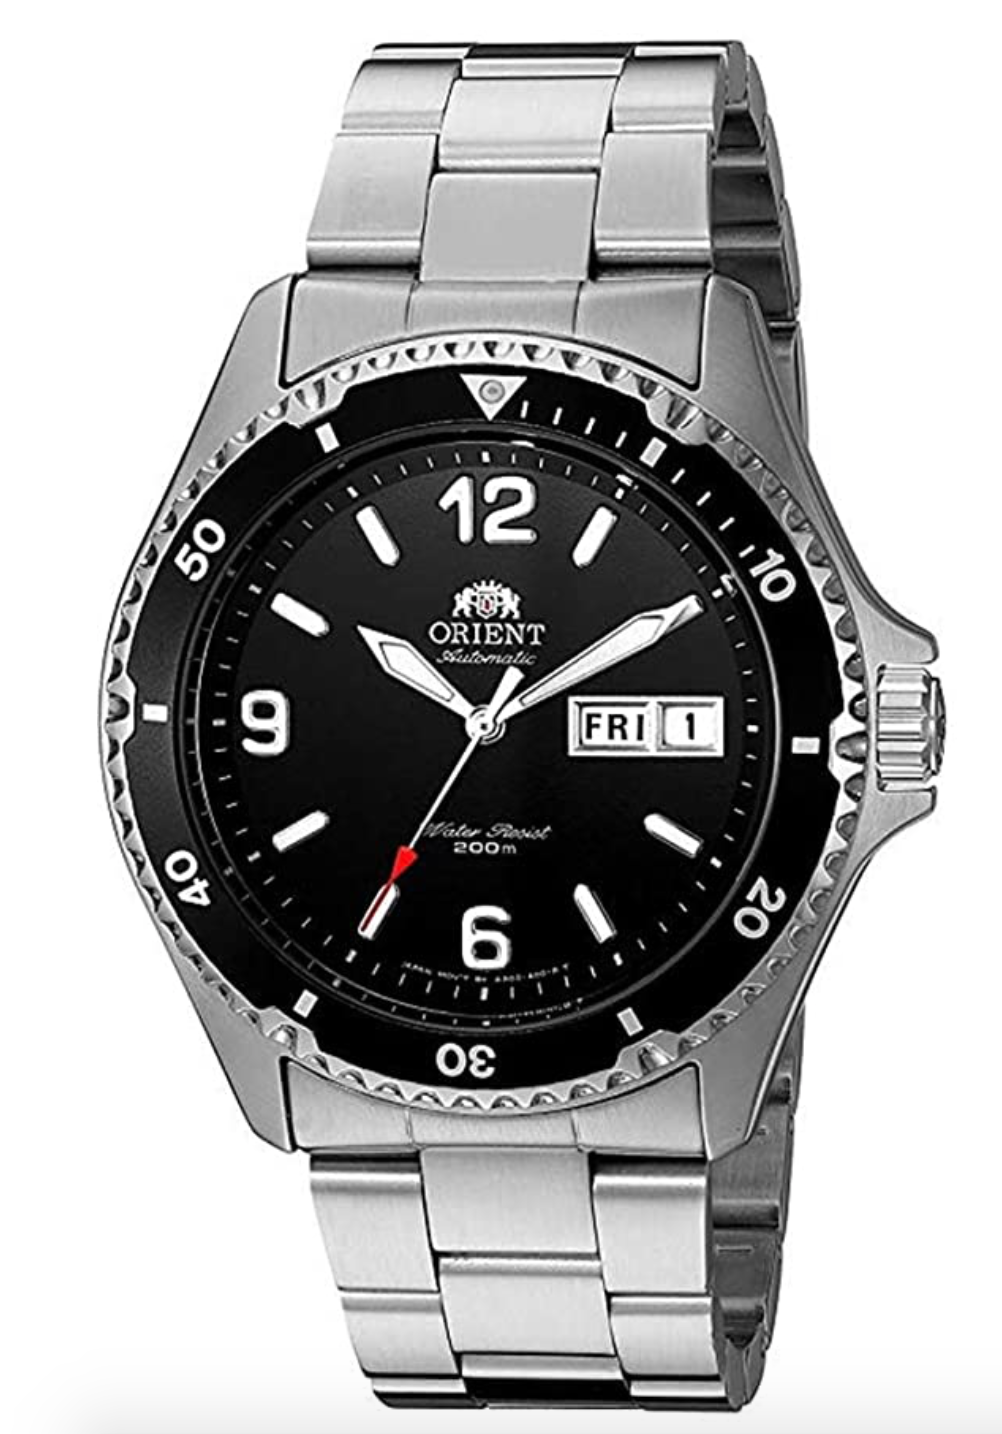 Orient 'Mako II' Automatic Diving Watch